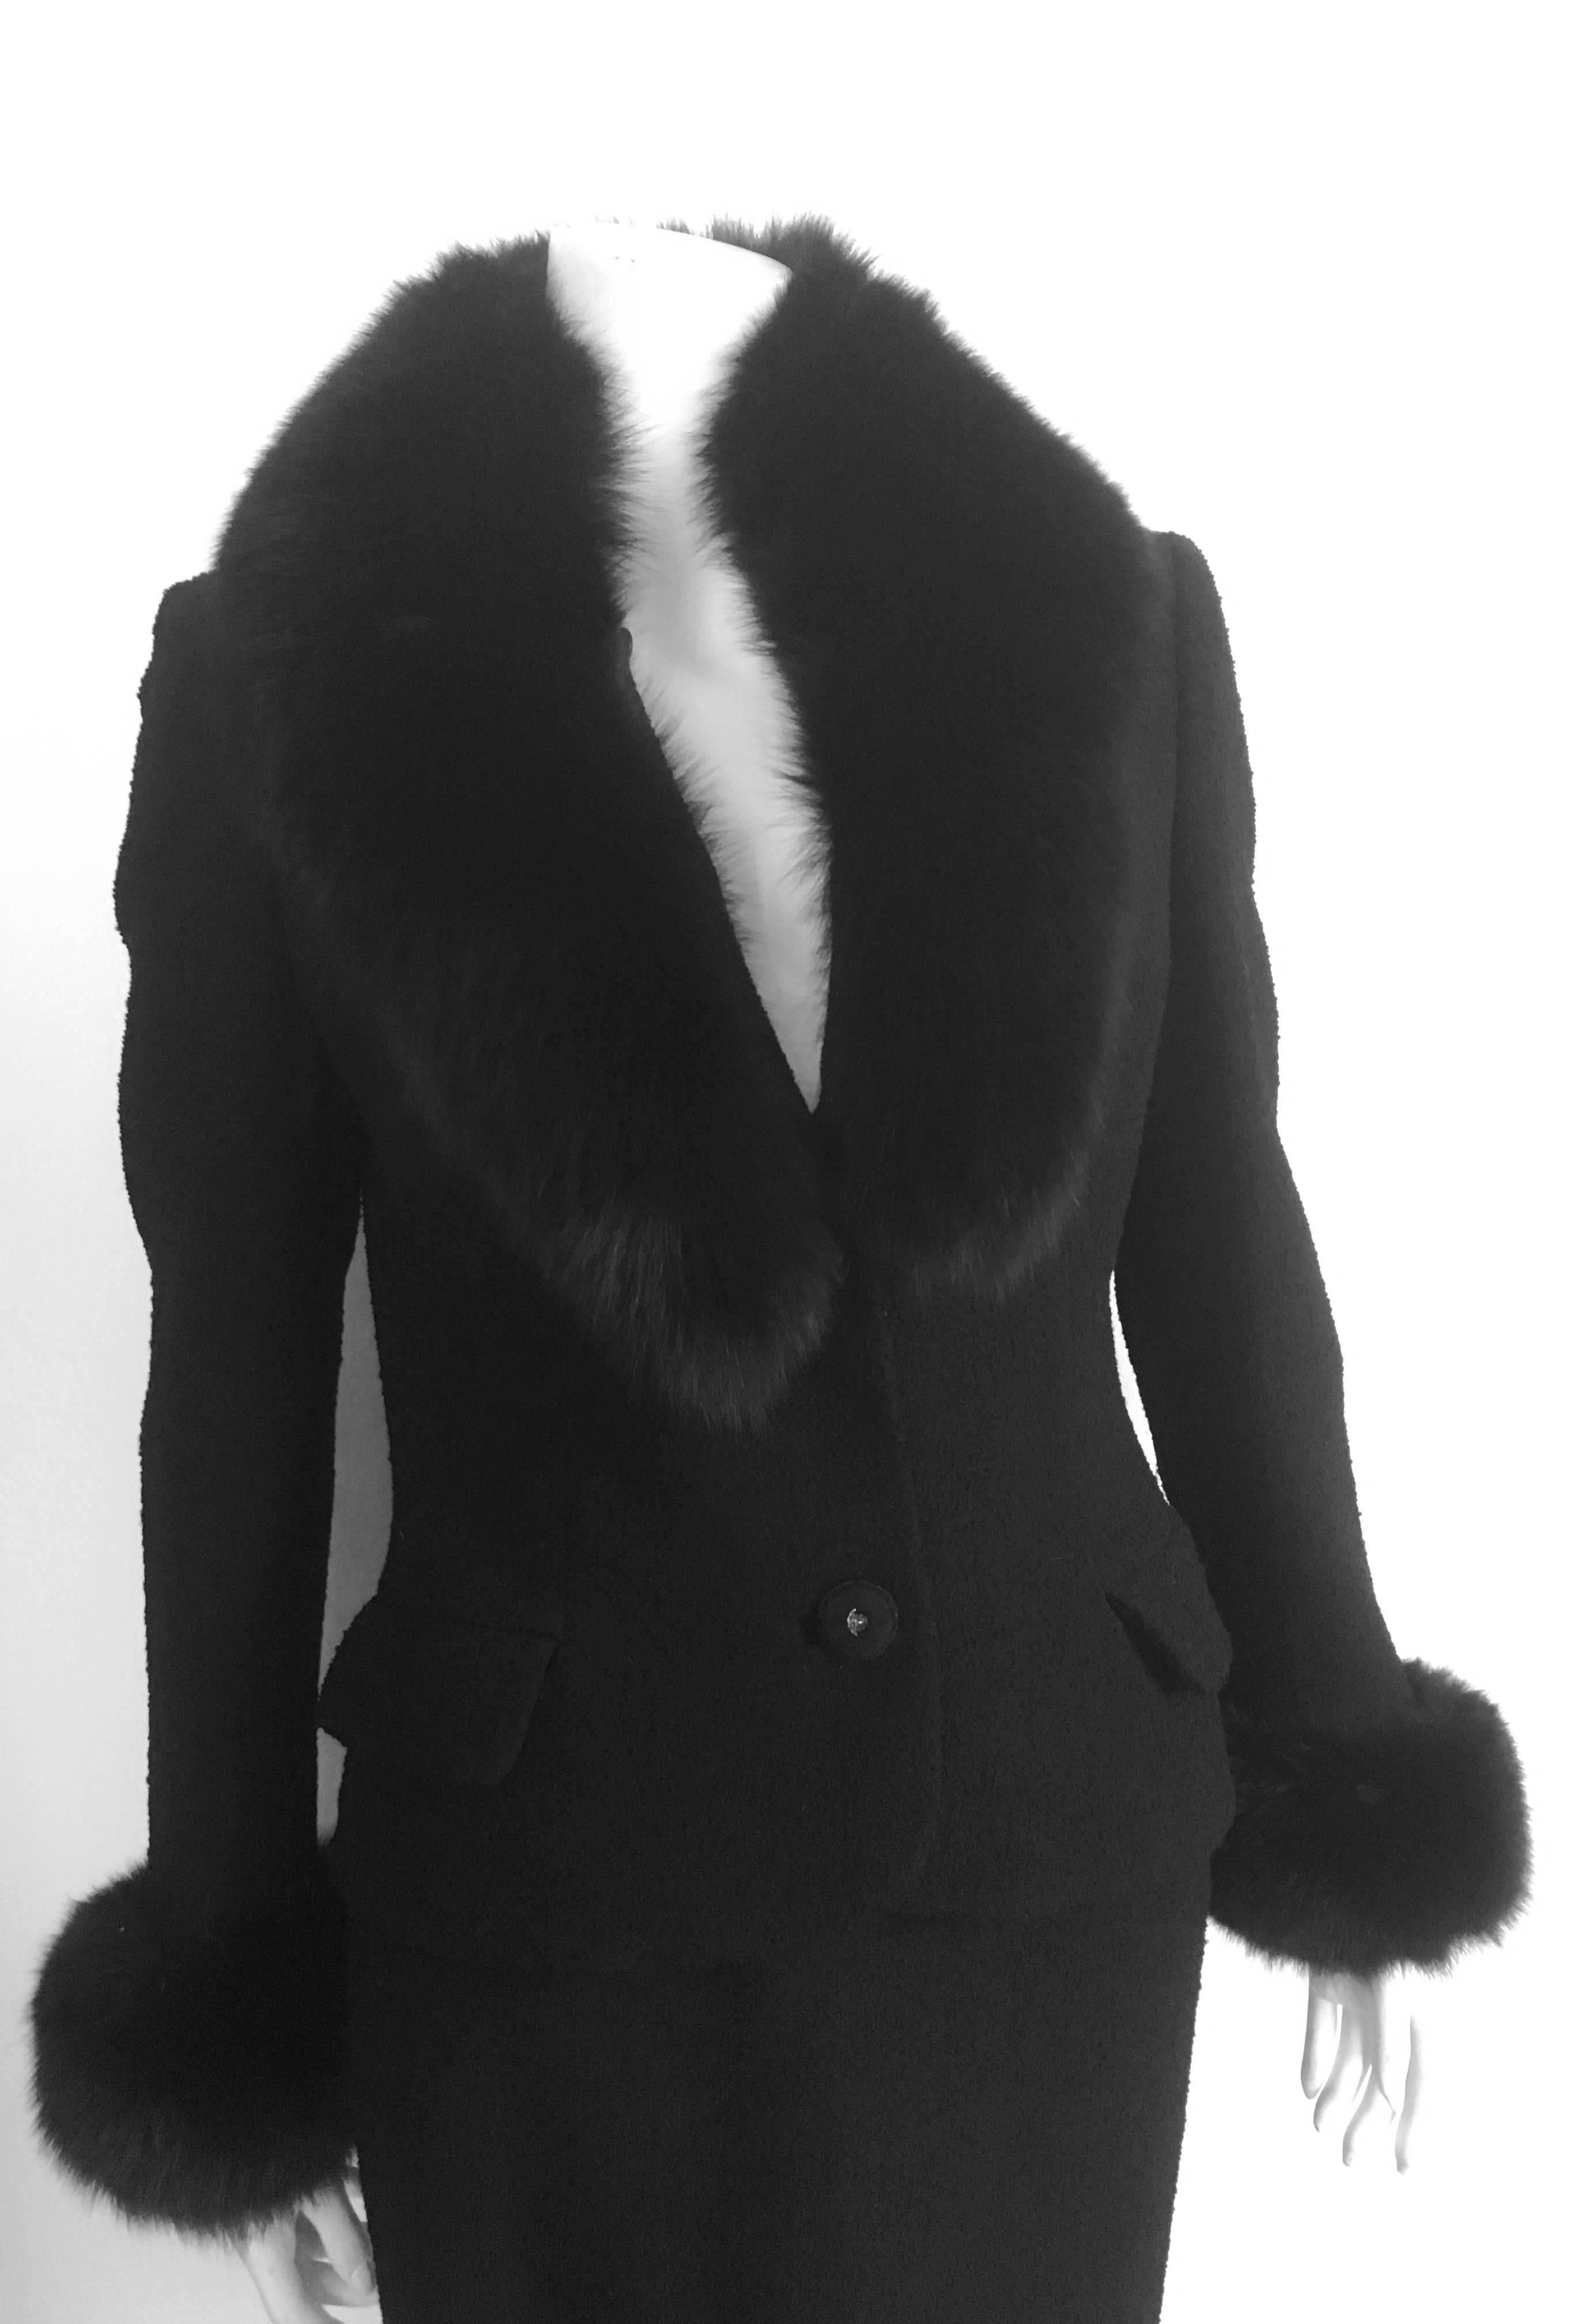 Gianni Versace Couture 1990s black boucle wool with fur collar & cuff jacket with long skirt is an Italian size 40 and fits like a size 4. Detachable fur collar and both pieces are fully lined. One of the loops on the detachable fur collar is